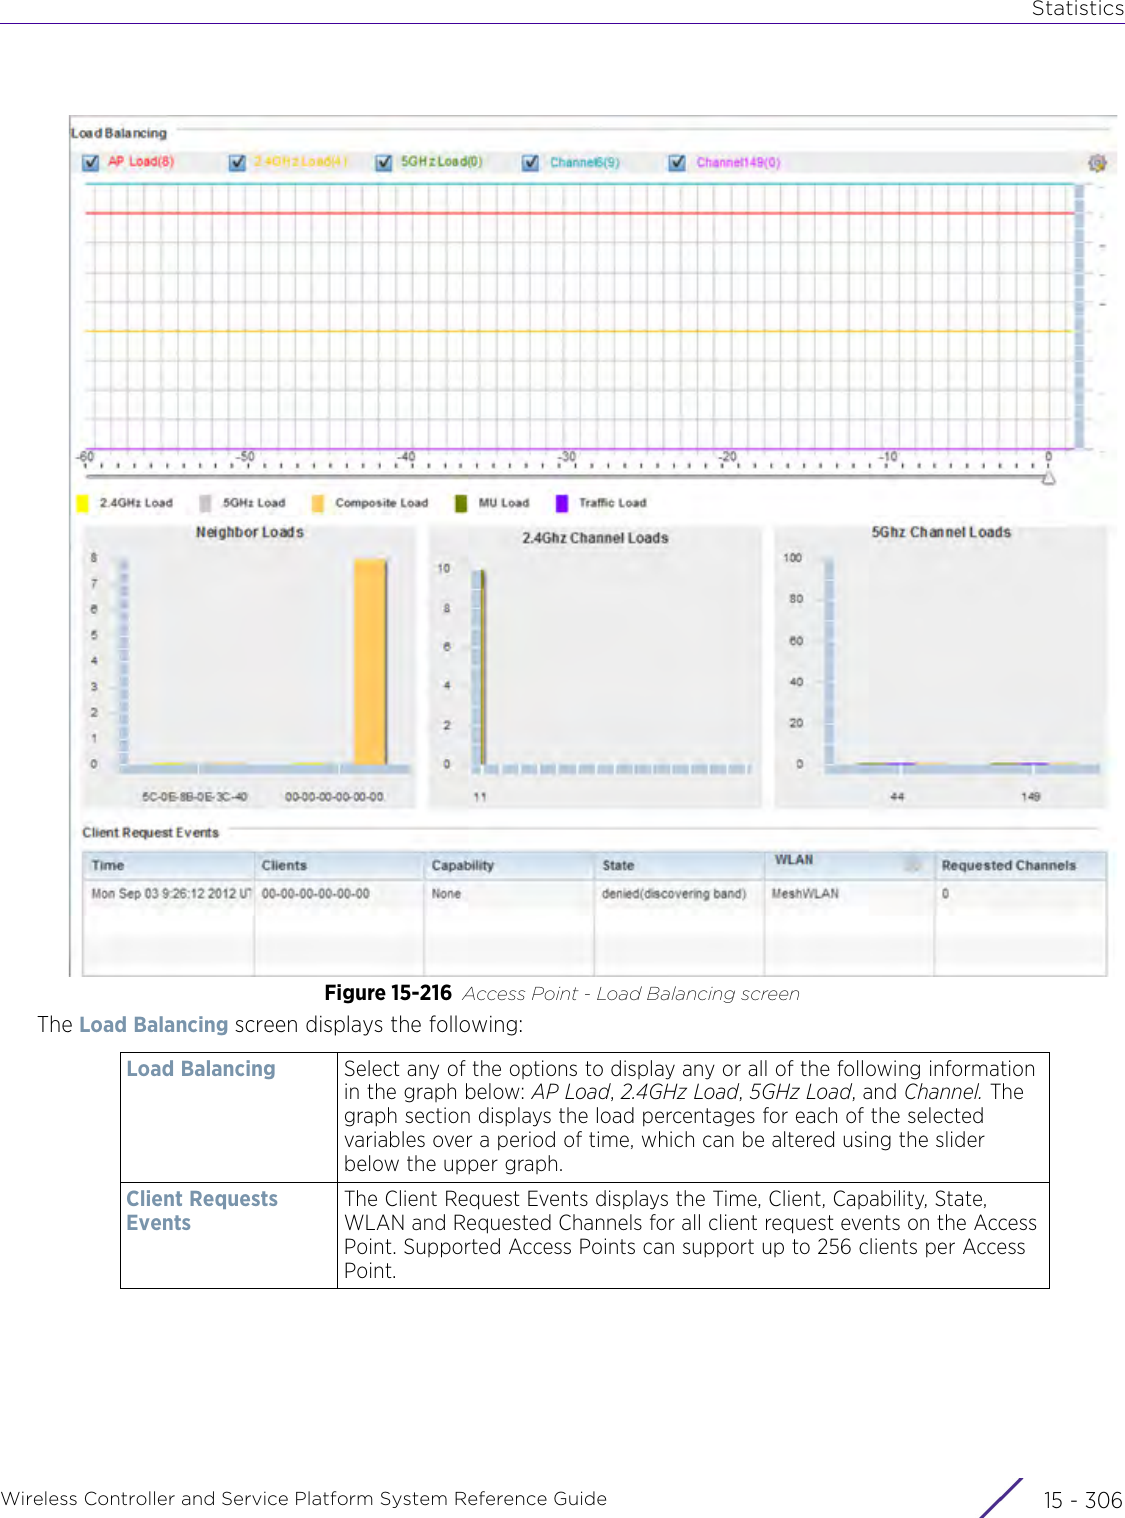 StatisticsWireless Controller and Service Platform System Reference Guide  15 - 306Figure 15-216 Access Point - Load Balancing screen The Load Balancing screen displays the following:Load Balancing Select any of the options to display any or all of the following information in the graph below: AP Load, 2.4GHz Load, 5GHz Load, and Channel. The graph section displays the load percentages for each of the selected variables over a period of time, which can be altered using the slider below the upper graph.Client Requests EventsThe Client Request Events displays the Time, Client, Capability, State, WLAN and Requested Channels for all client request events on the Access Point. Supported Access Points can support up to 256 clients per Access Point. 